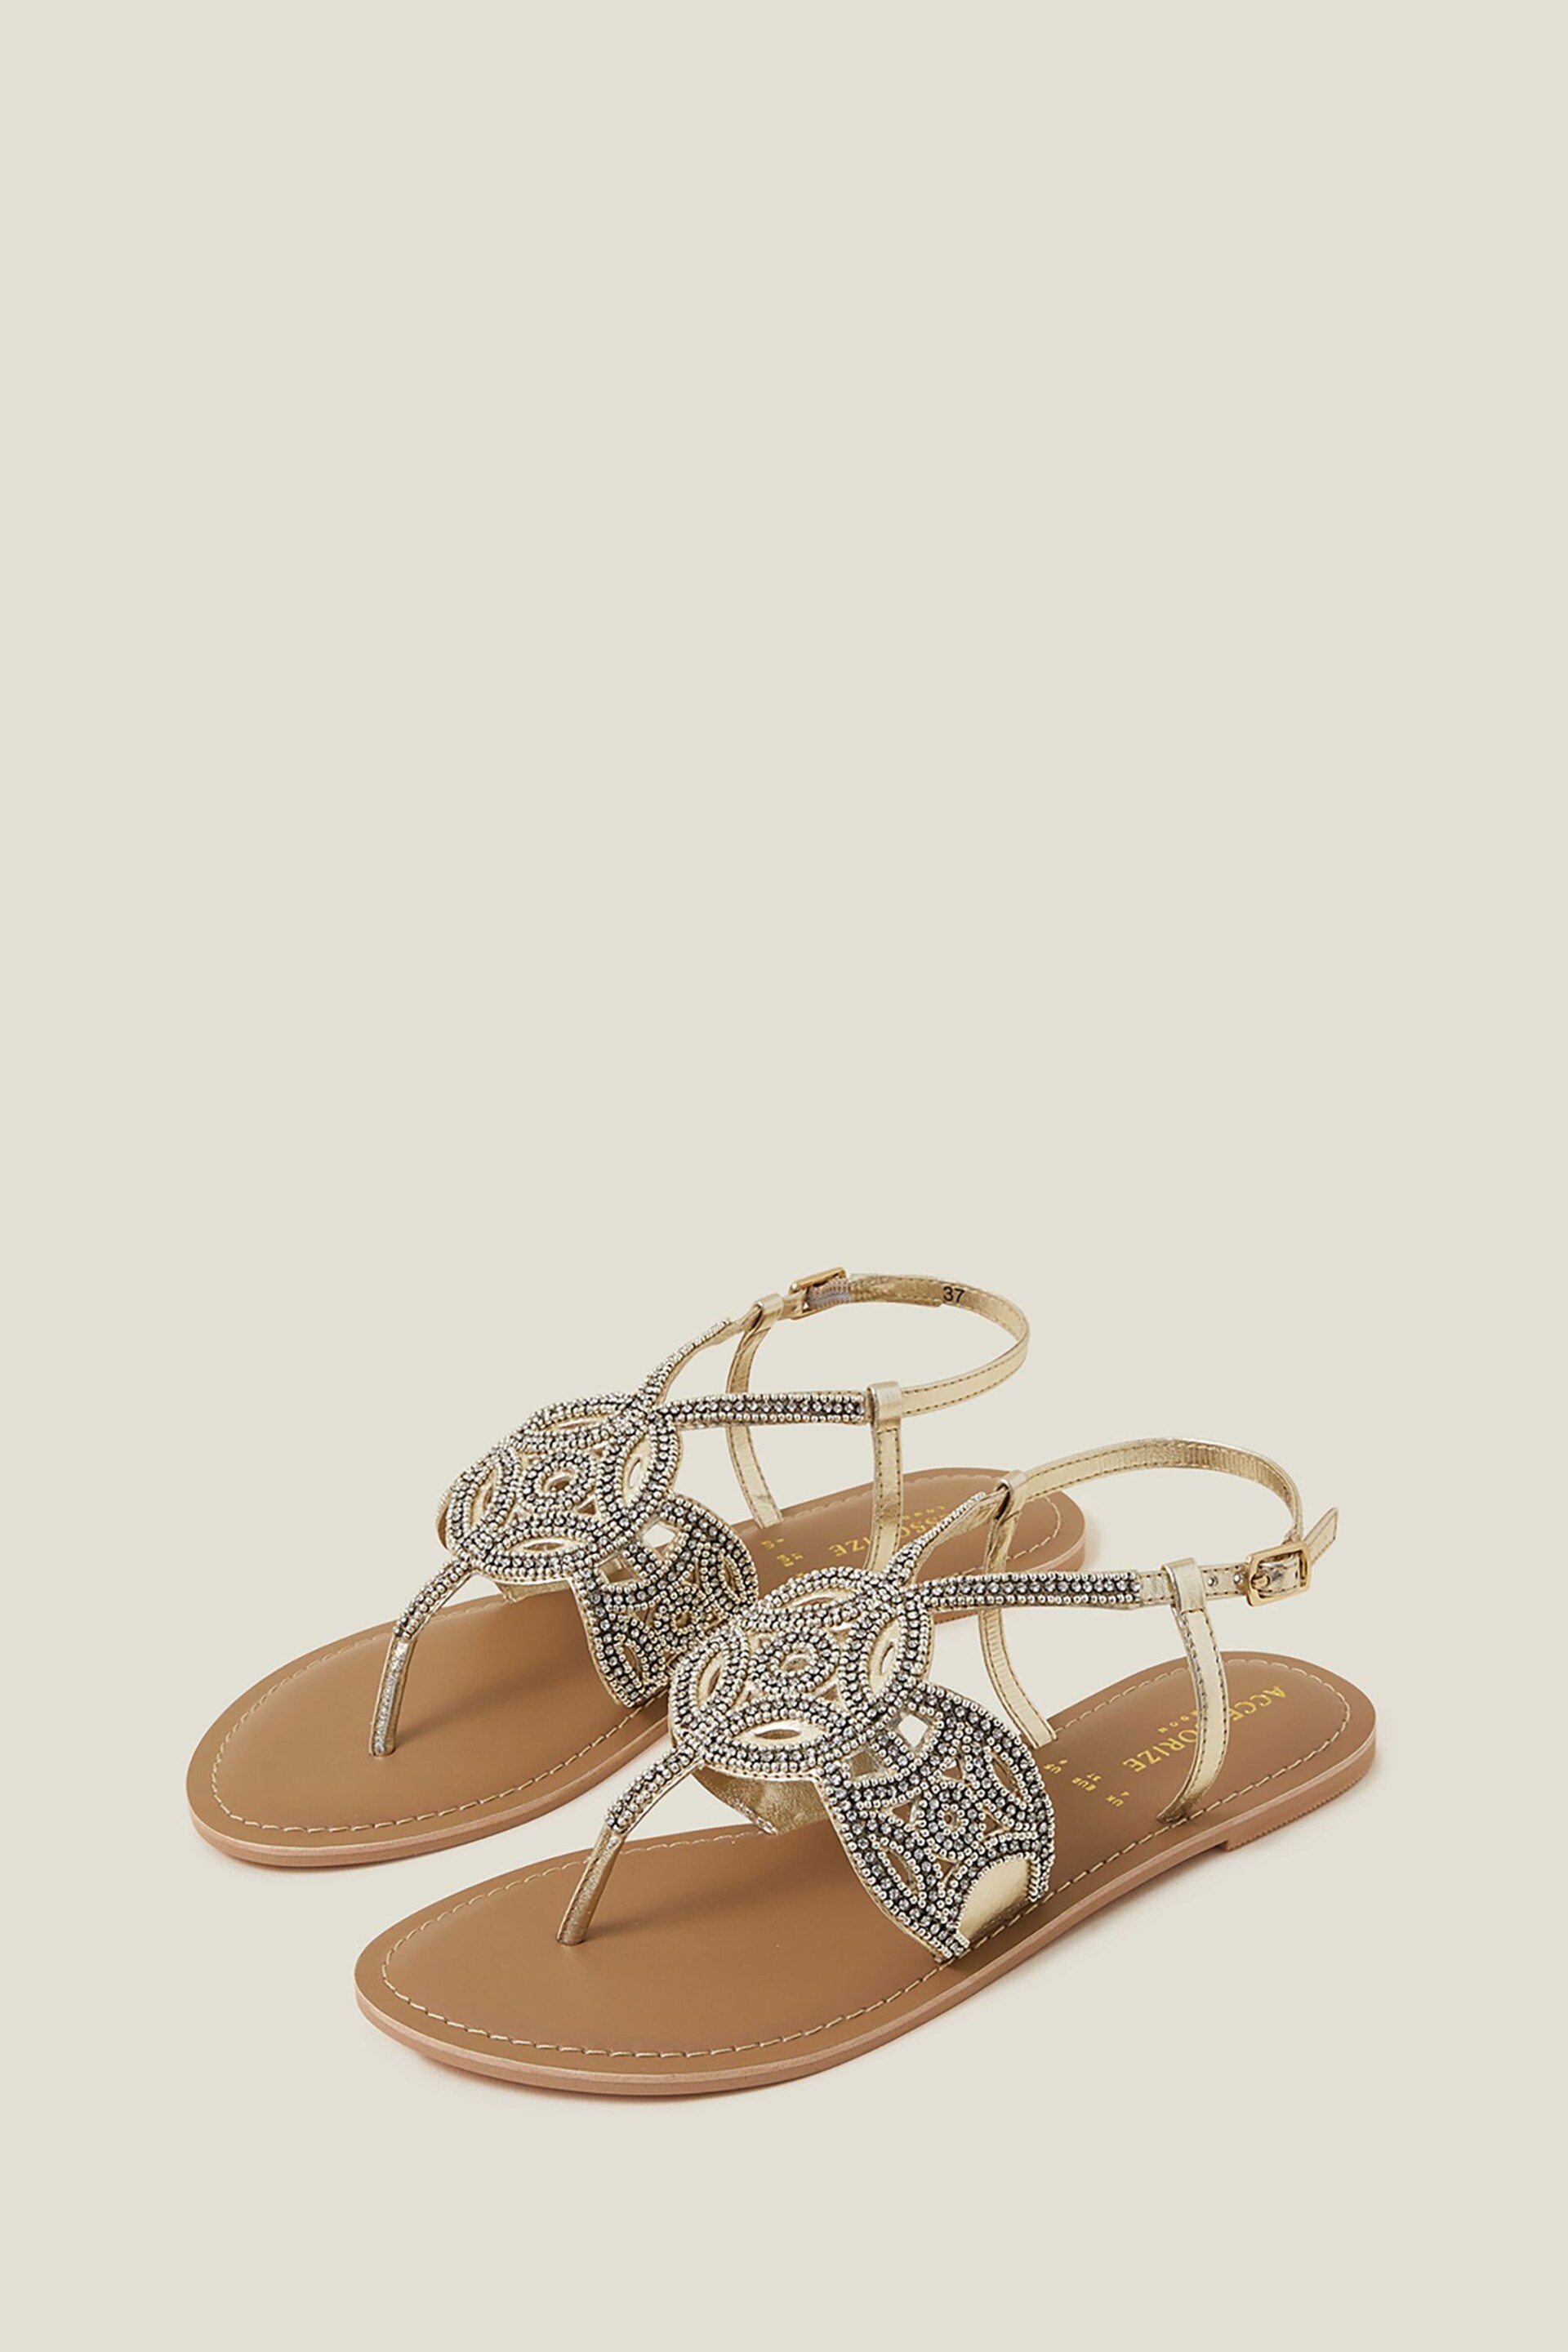 Accessorize Brown/Gold Sparkle Circle Sandals - Image 2 of 4